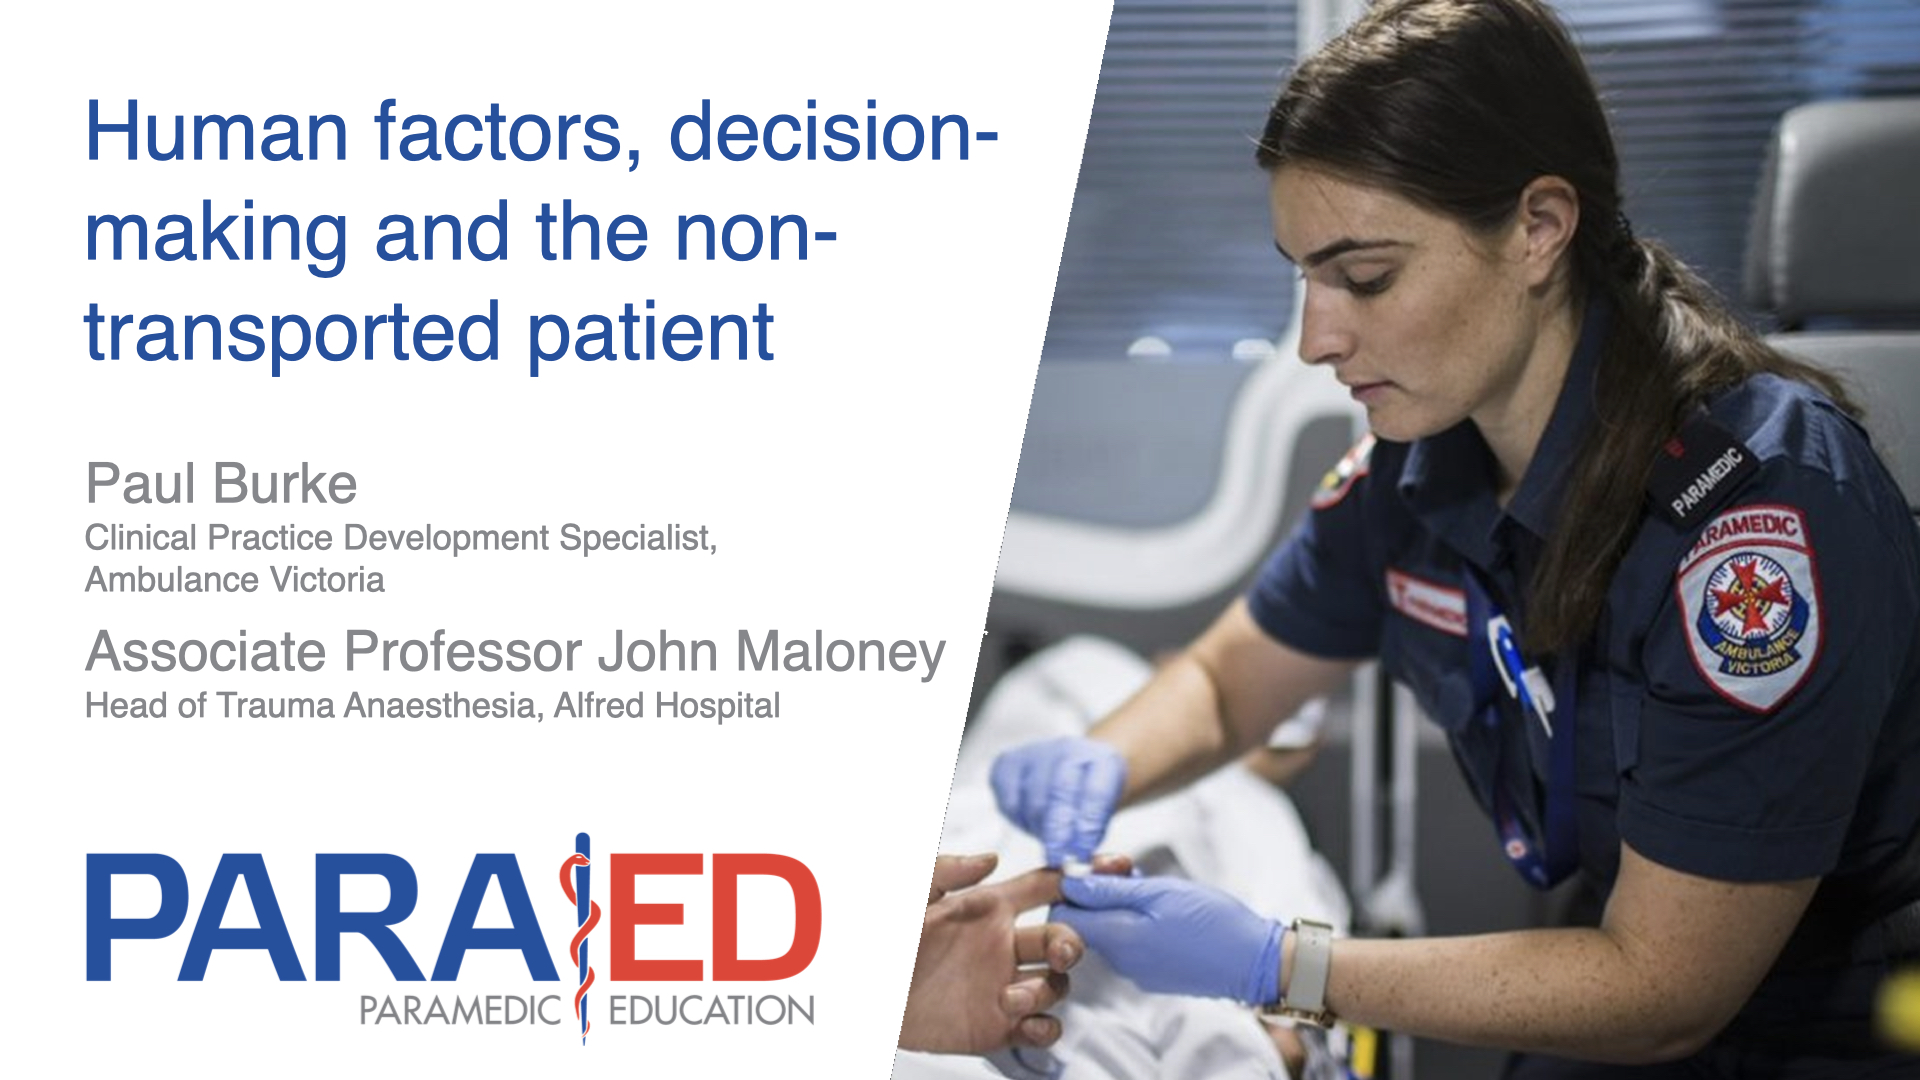 Human factors decision-making and the non-transported patient